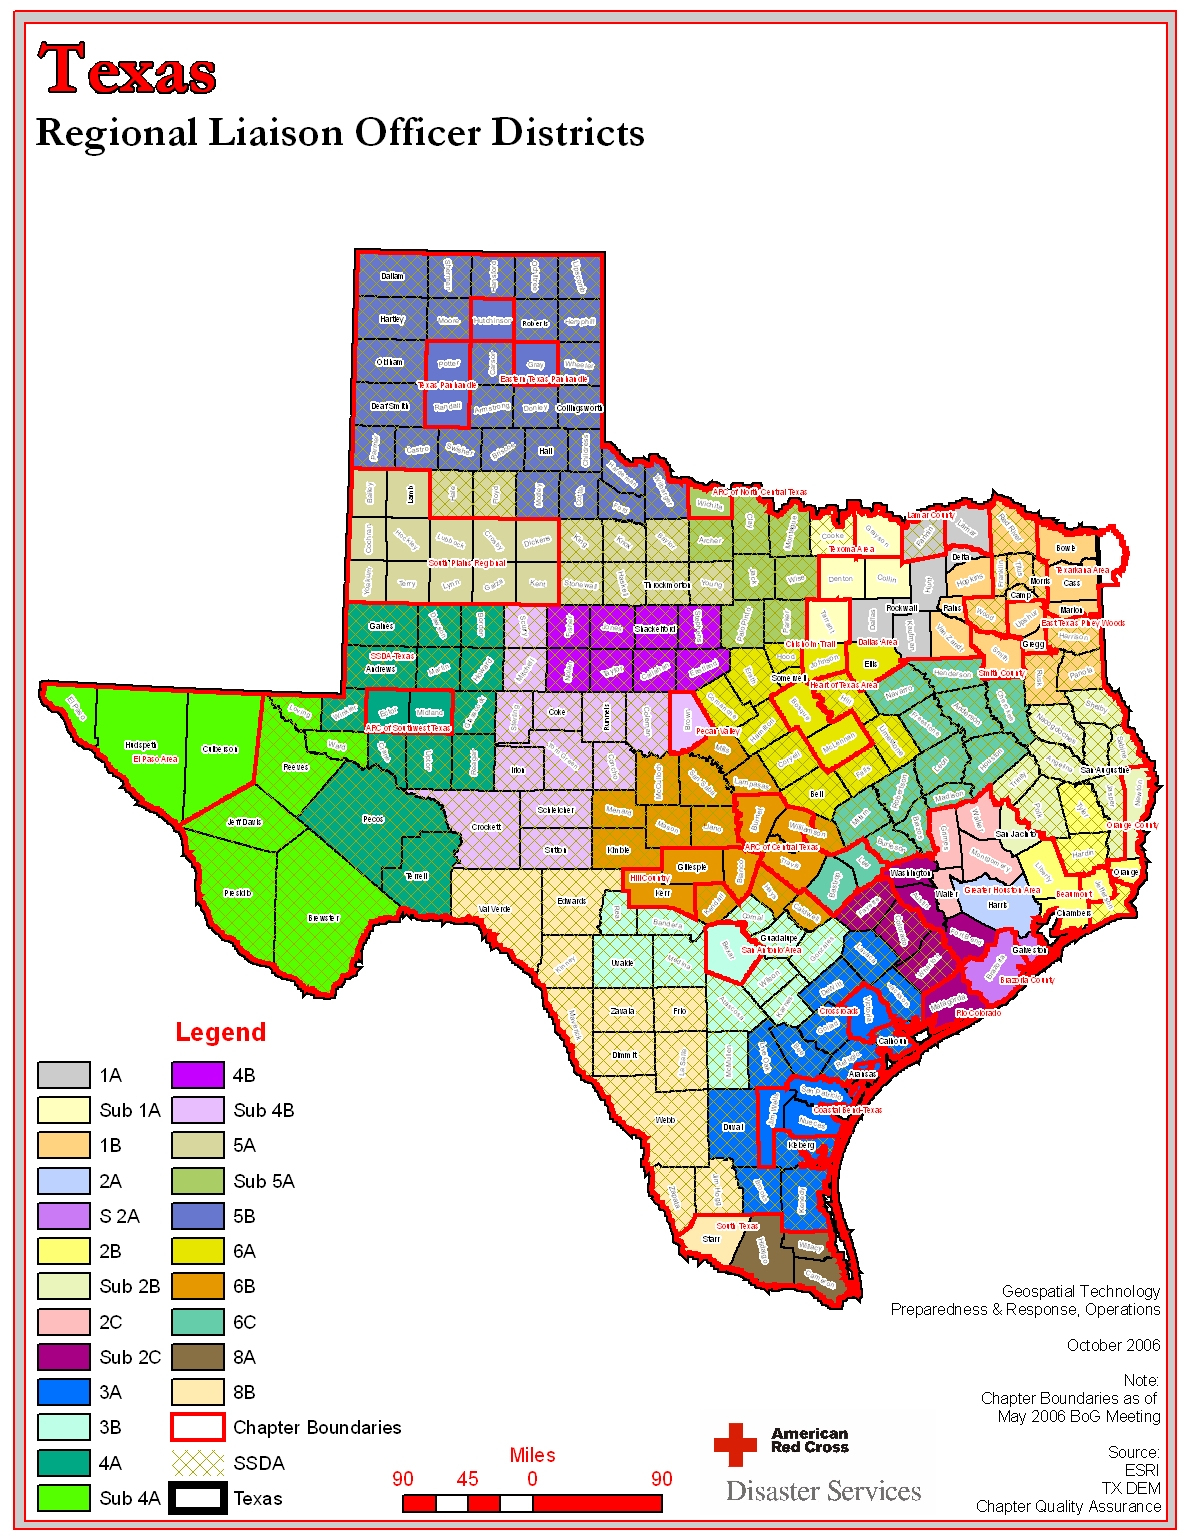 Texas Flood Zone Map Elegant American Red Cross Maps And Graphics - Texas Flood Zone Map 2016